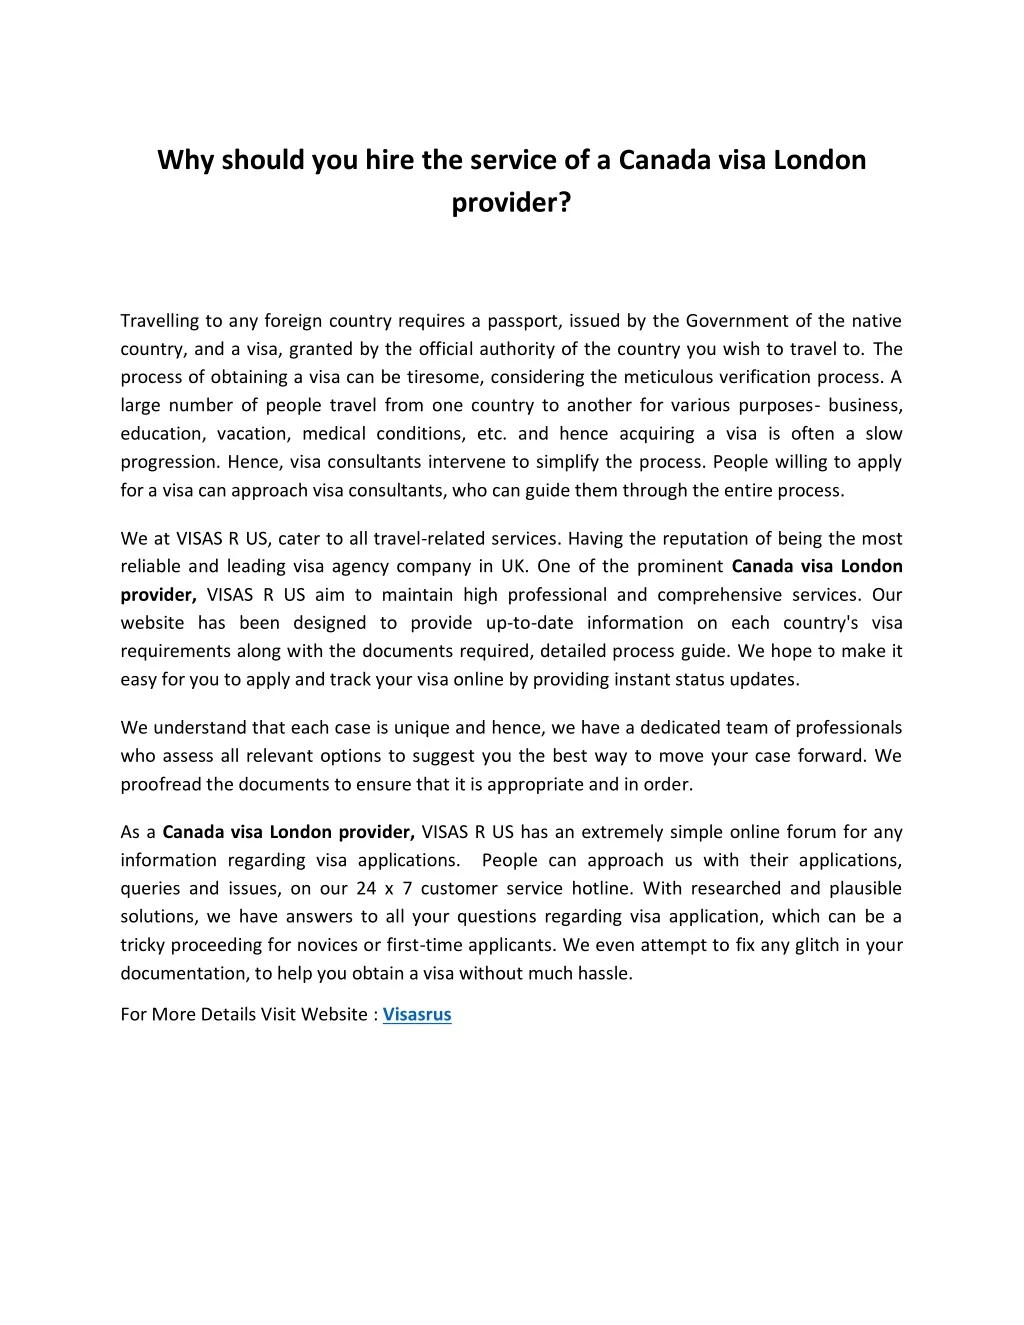 why should you hire the service of a canada visa